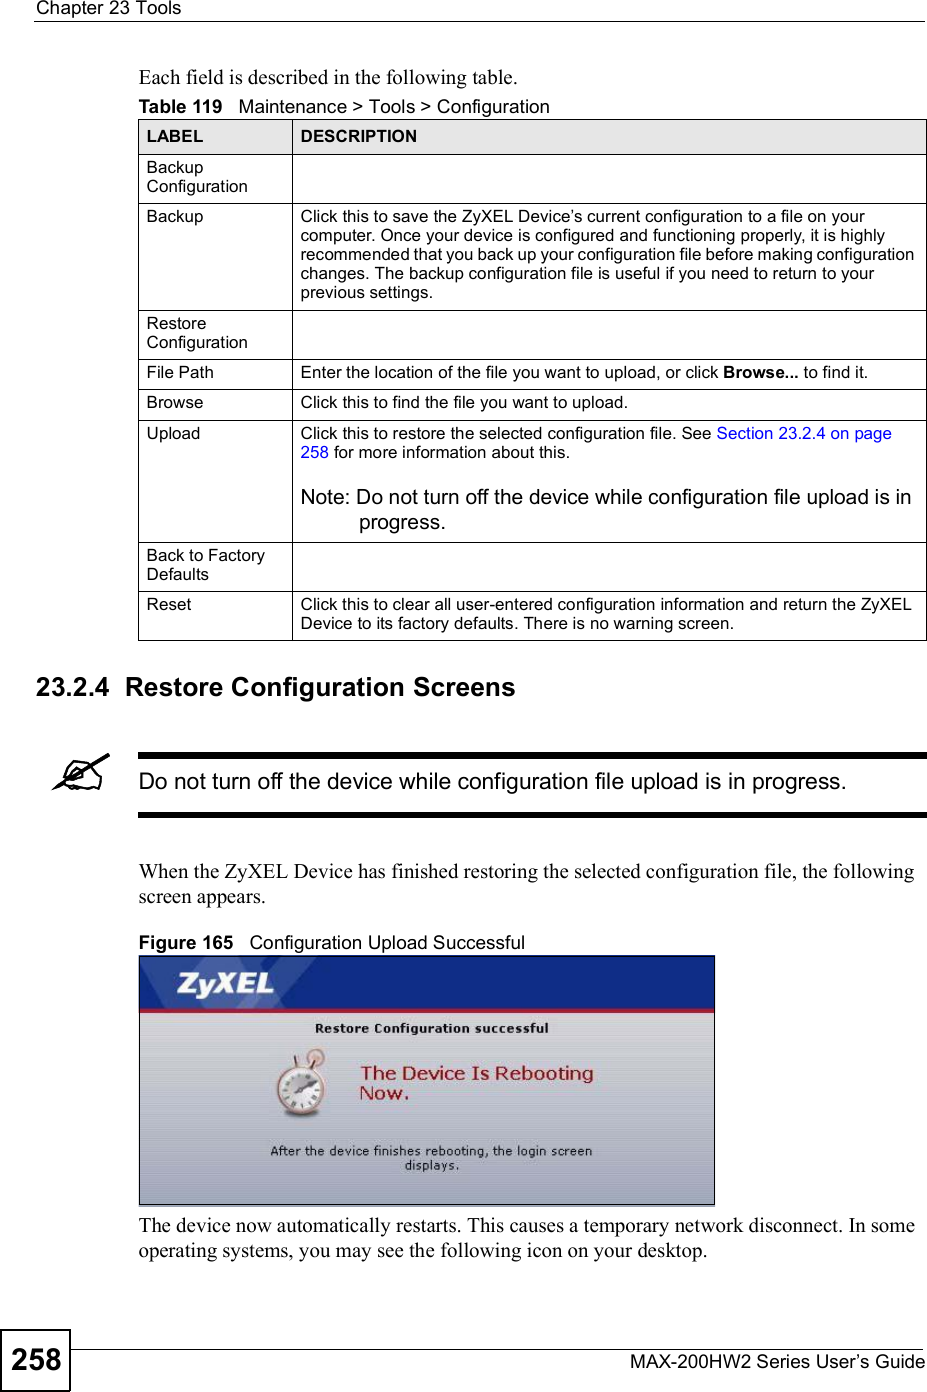 Chapter 23ToolsMAX-200HW2 Series User s Guide258Each field is described in the following table.23.2.4  Restore Configuration ScreensDo not turn off the device while configuration file upload is in progress.When the ZyXEL Device has finished restoring the selected configuration file, the following screen appears.Figure 165   Configuration Upload SuccessfulThe device now automatically restarts. This causes a temporary network disconnect. In some operating systems, you may see the following icon on your desktop.Table 119   Maintenance &gt; Tools &gt; ConfigurationLABEL DESCRIPTIONBackup ConfigurationBackup Click this to save the ZyXEL Device s current configuration to a file on your computer. Once your device is configured and functioning properly, it is highly recommended that you back up your configuration file before making configuration changes. The backup configuration file is useful if you need to return to your previous settings.Restore ConfigurationFile PathEnter the location of the file you want to upload, or click Browse... to find it.BrowseClick this to find the file you want to upload.UploadClick this to restore the selected configuration file. See Section 23.2.4 on page 258 for more information about this.Note: Do not turn off the device while configuration file upload is in progress.Back to Factory DefaultsReset Click this to clear all user-entered configuration information and return the ZyXEL Device to its factory defaults. There is no warning screen.